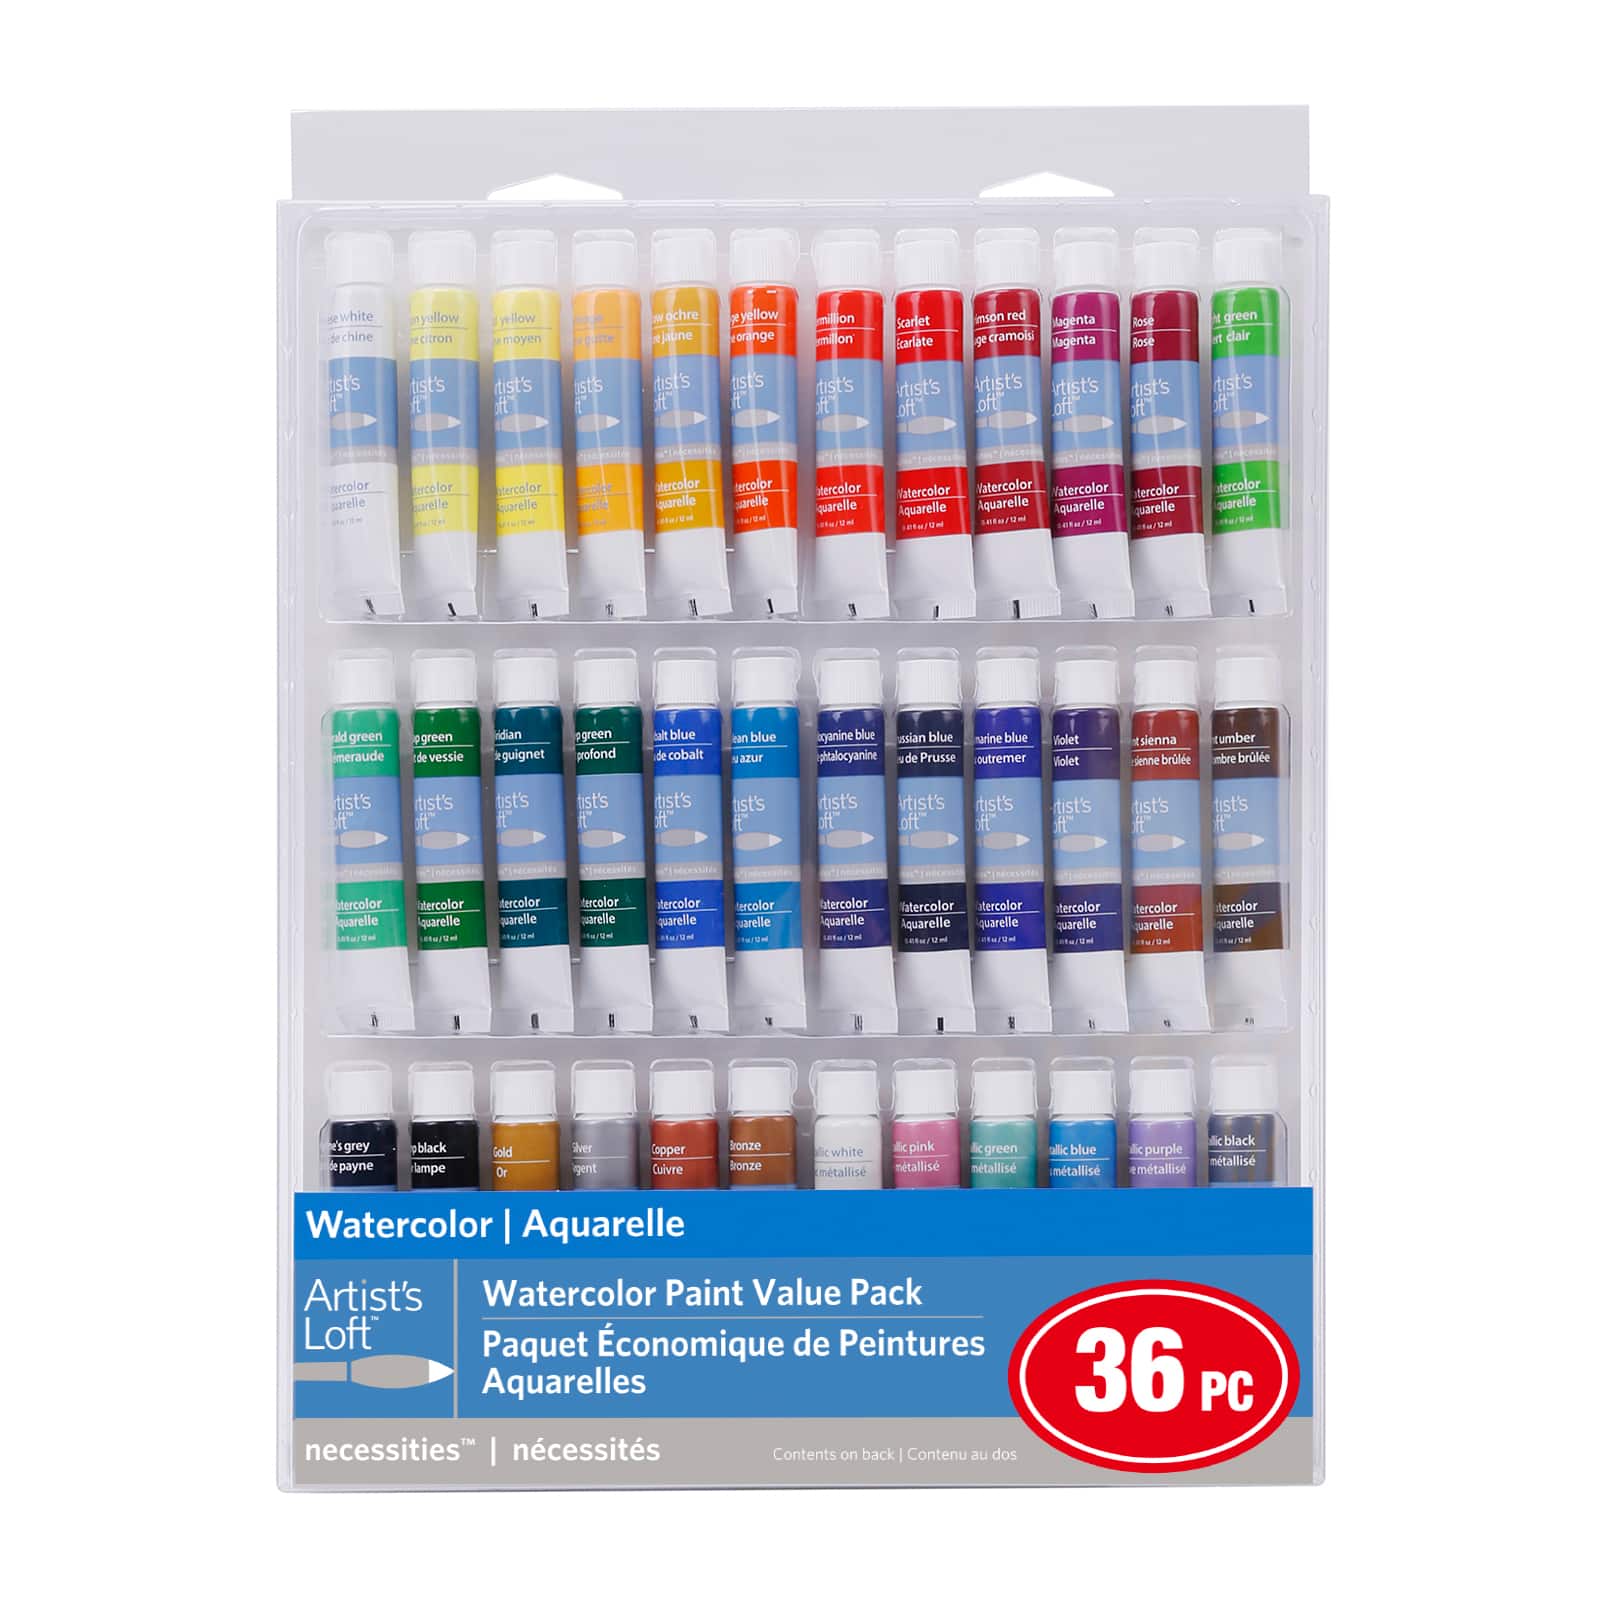 Rob's Art Supply Reviews: Portable Painter Watercolor Palette and